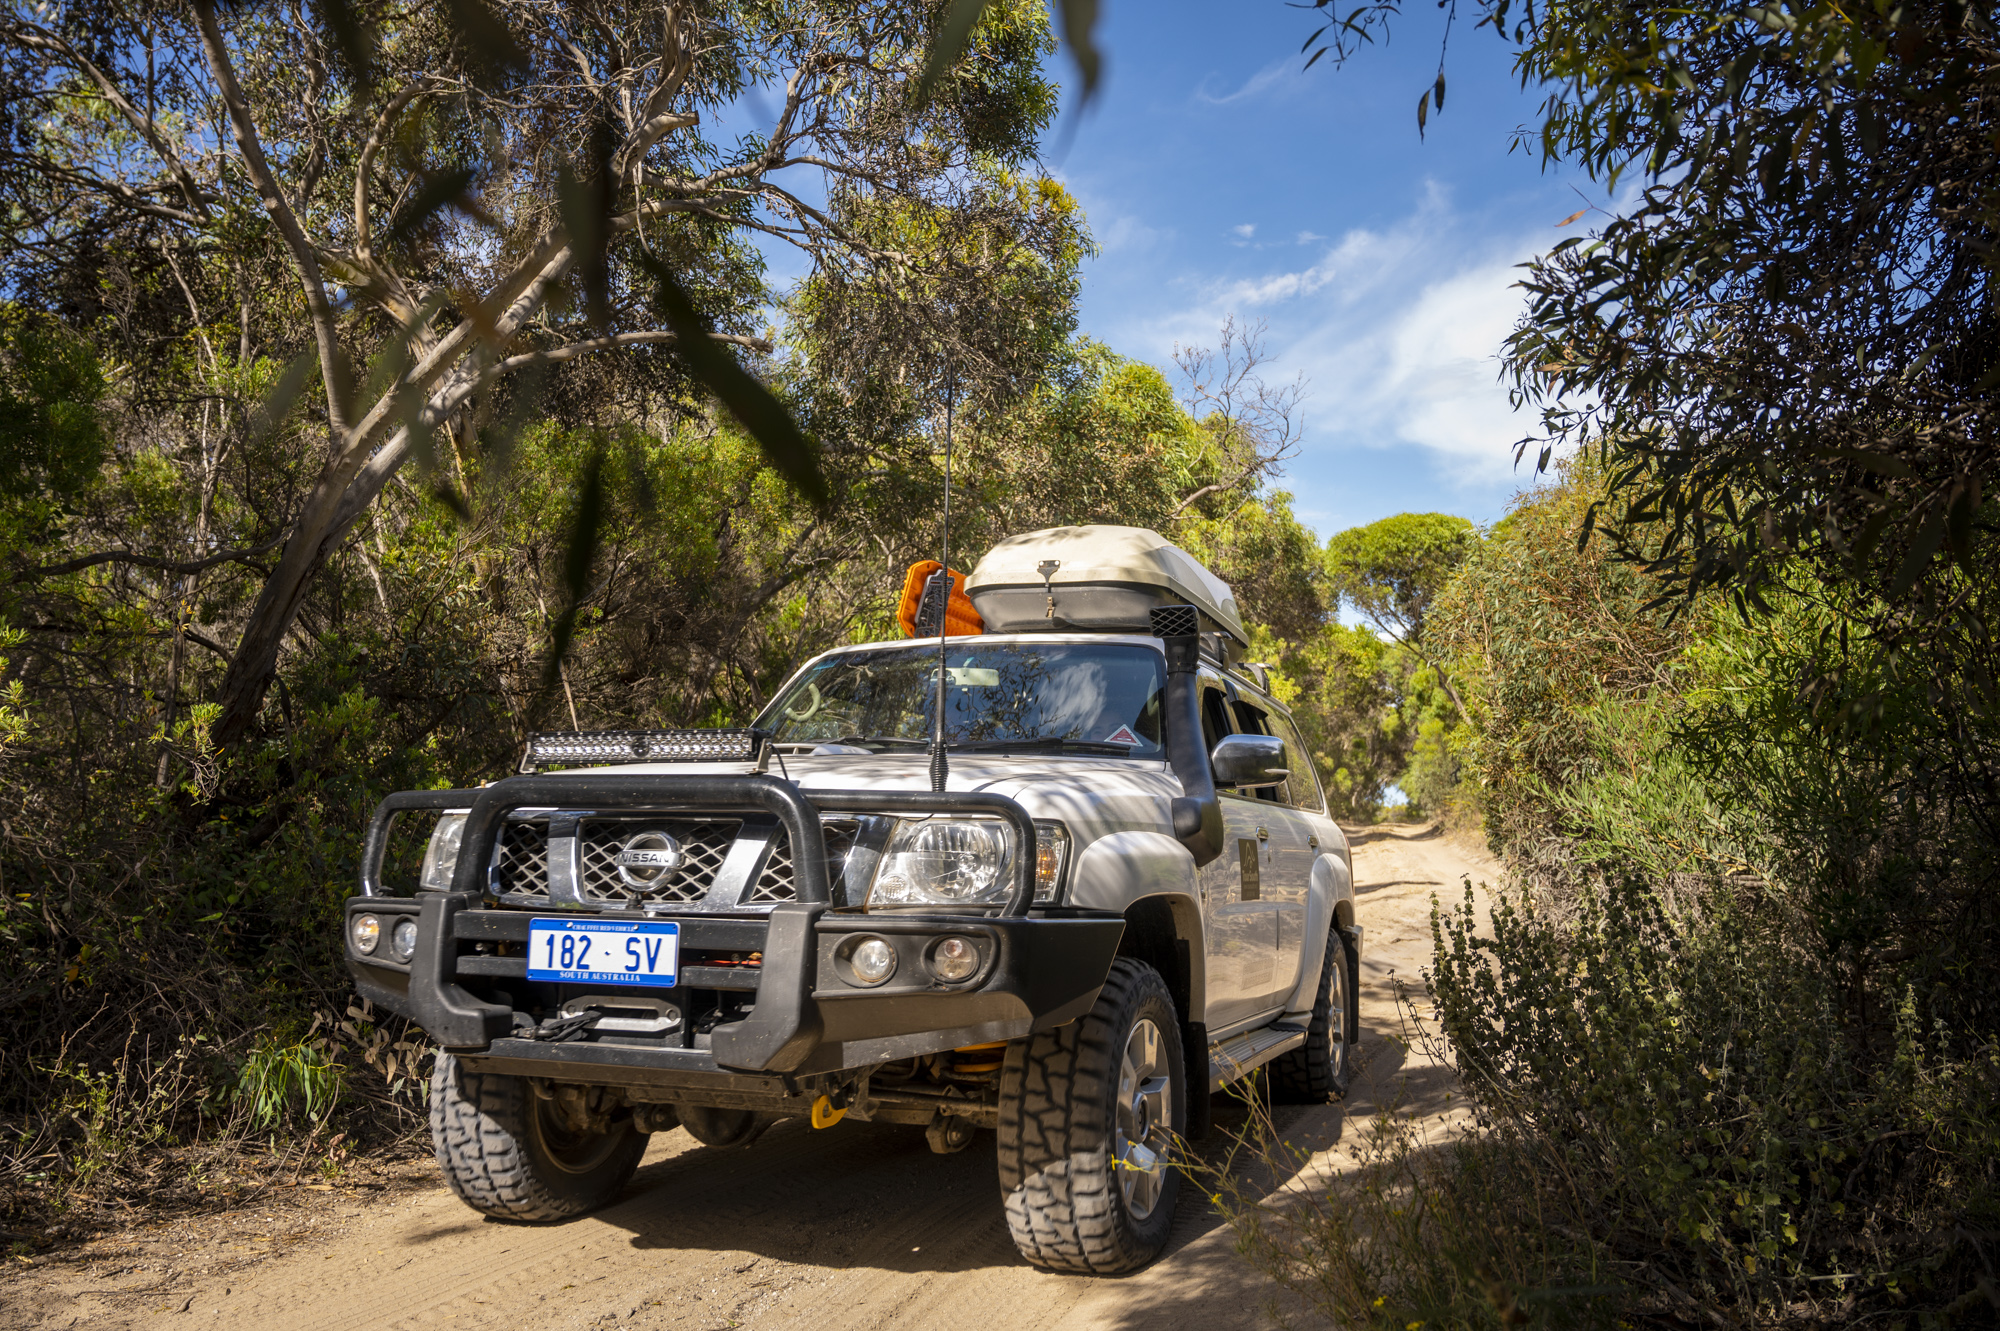 Coffin Bay National Park Sightseeing & Off-road Tour